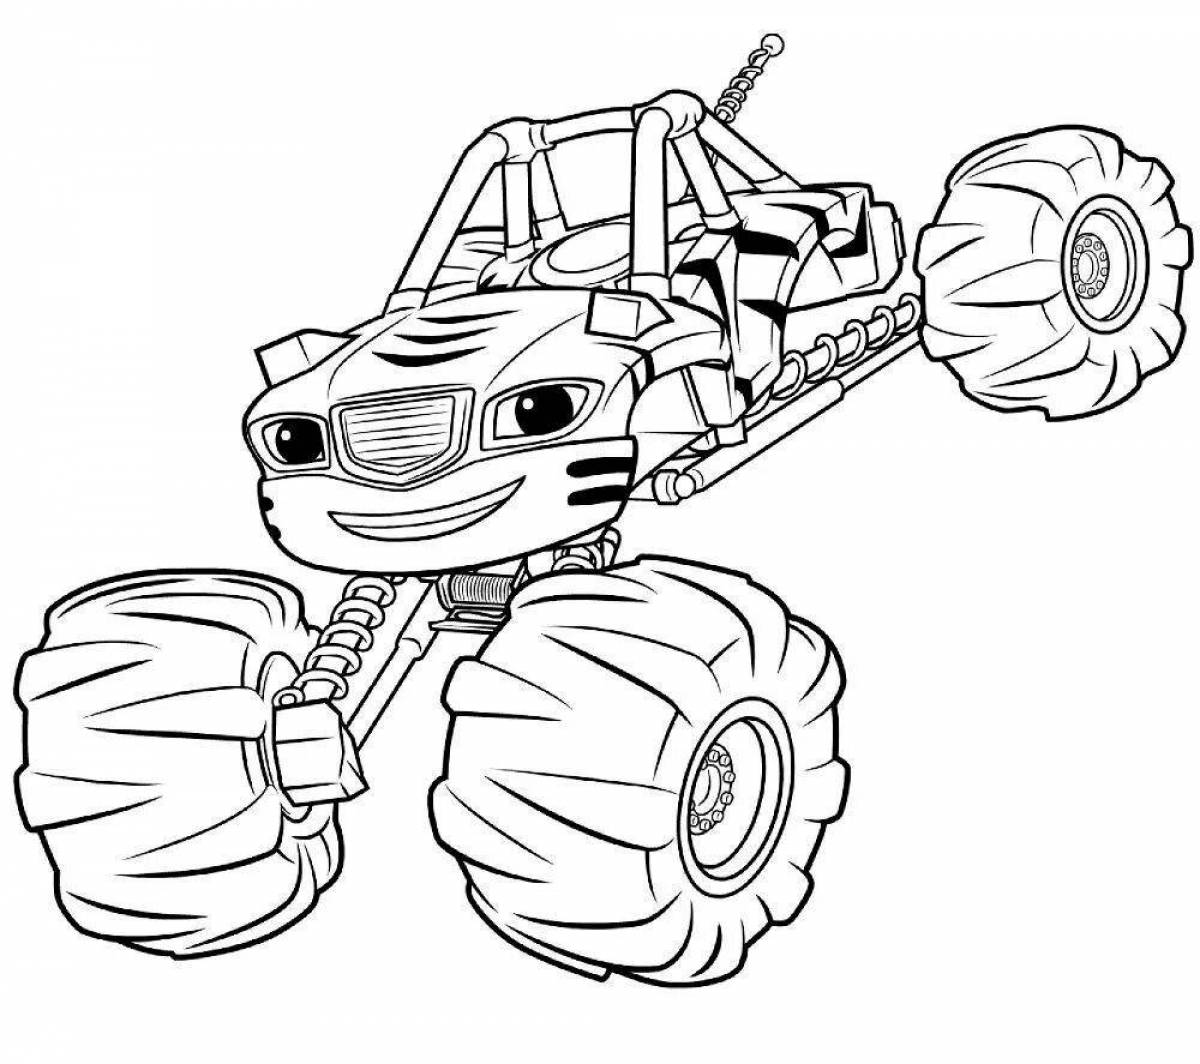 Coloring page dazzling wonder cars for kids